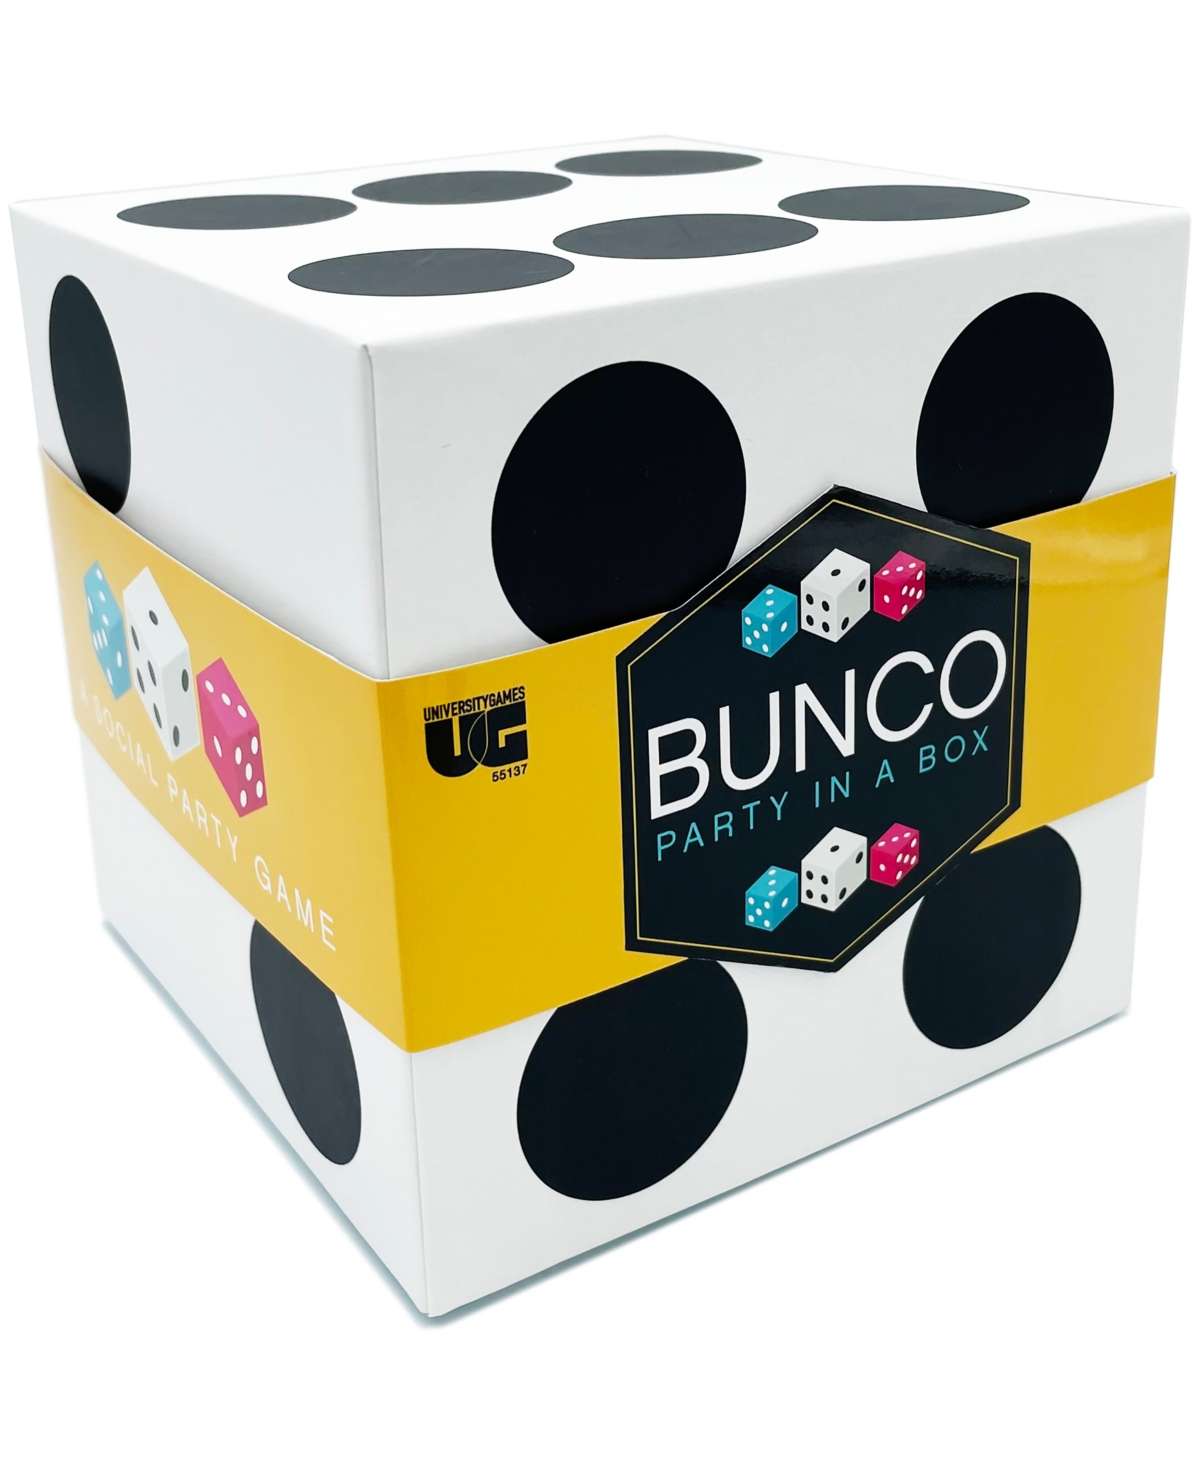 University Games Kids' Bunco Party In A Box Set, 14 Piece In Multi Color